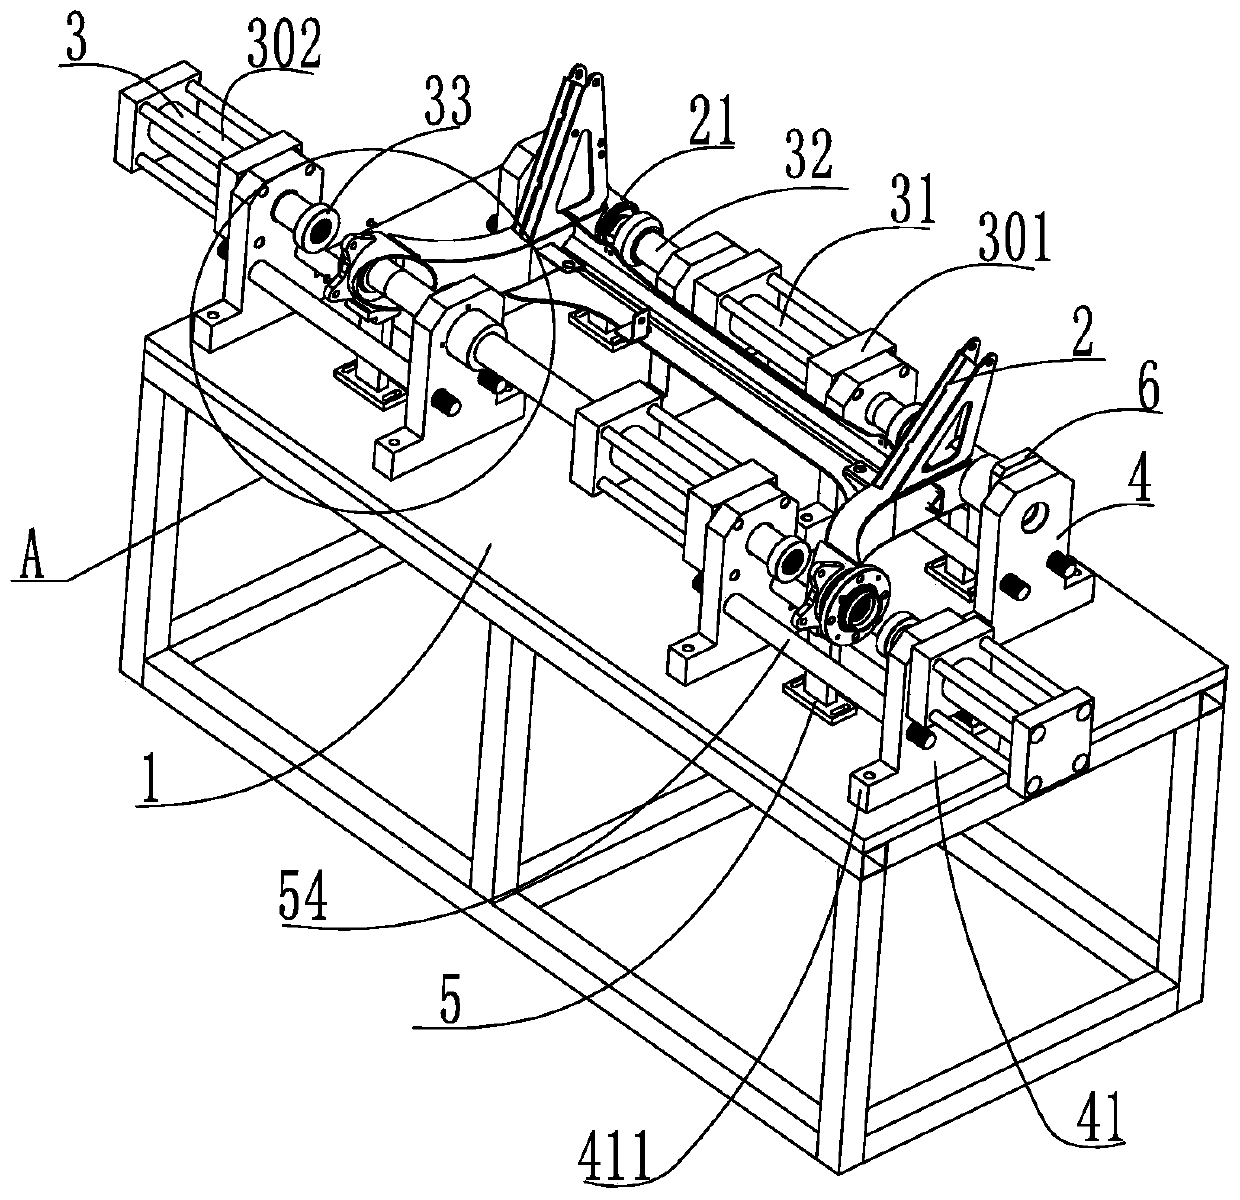 A multi-station synchronous rear axle bearing pressing equipment